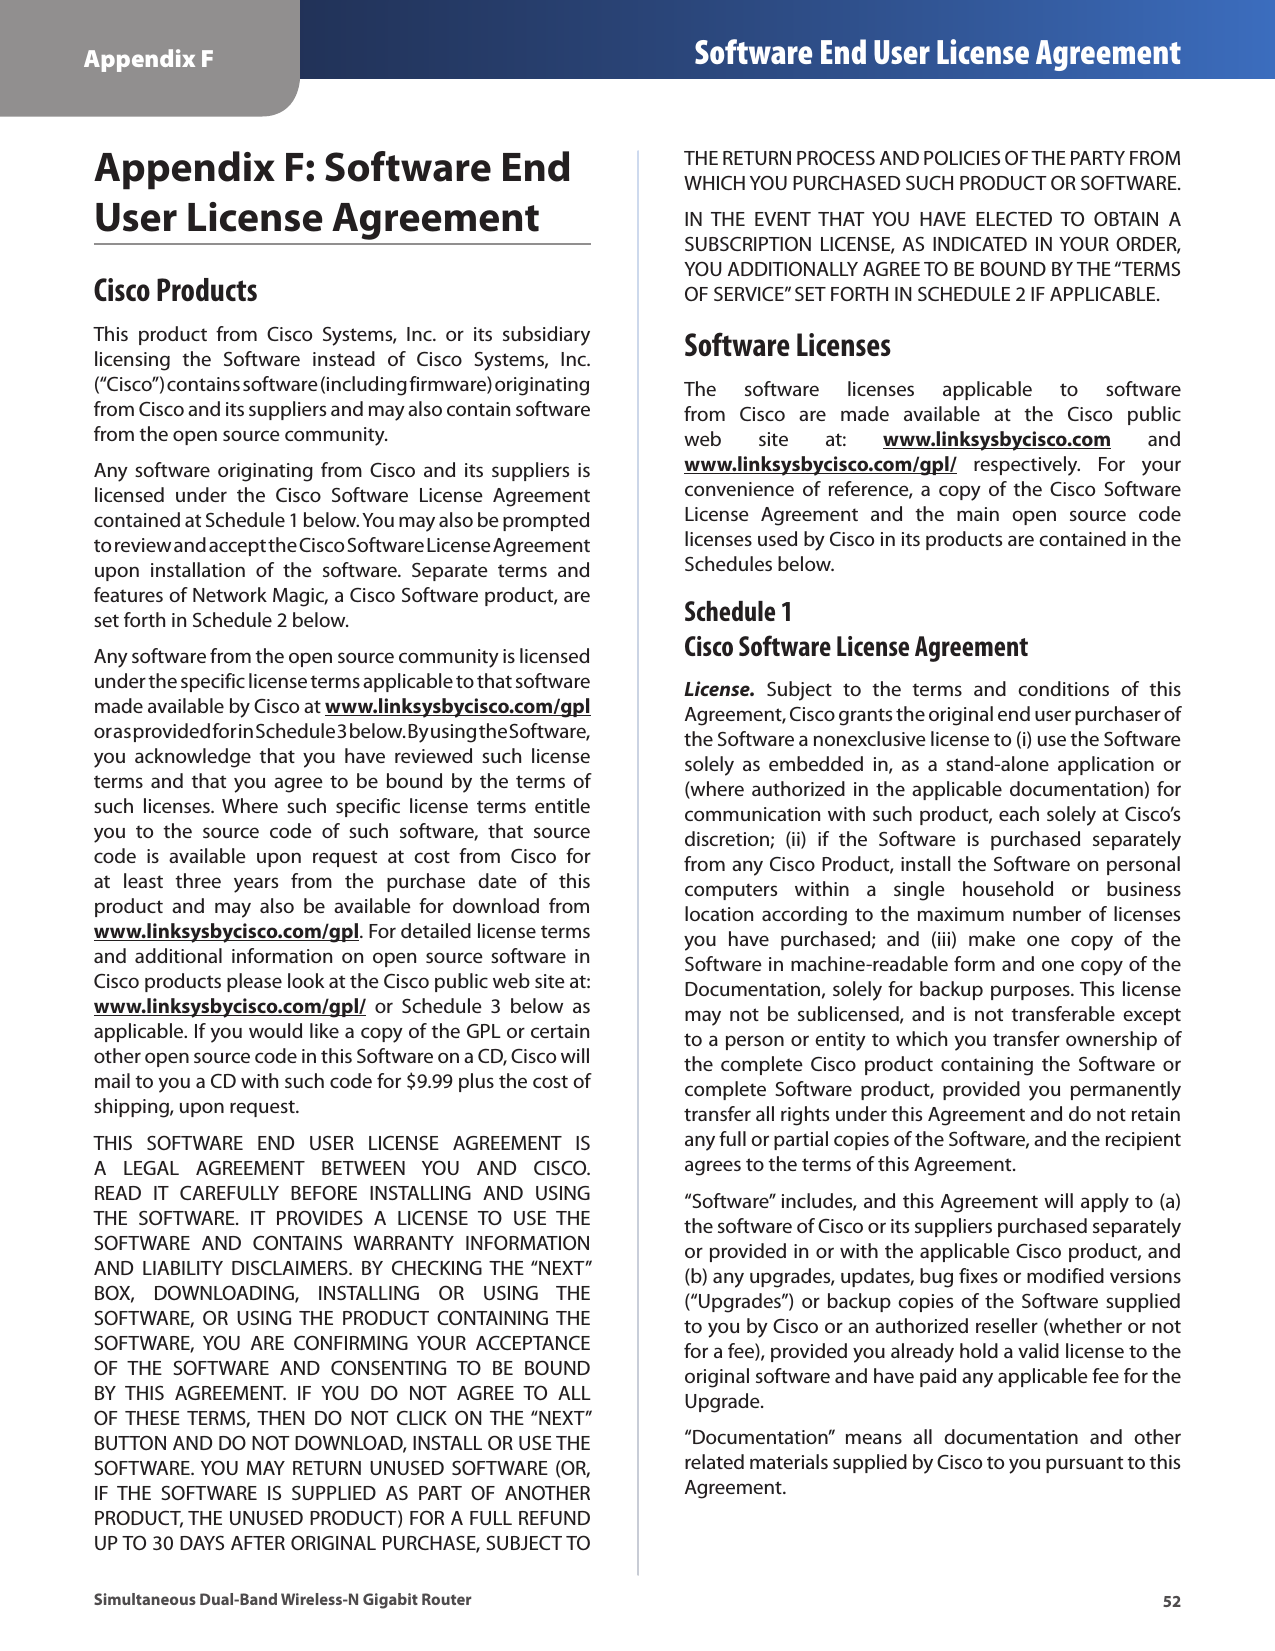 52Appendix F Software End User License AgreementSimultaneous Dual-Band Wireless-N Gigabit RouterAppendix F: Software End User License AgreementCisco ProductsThis  product  from  Cisco  Systems,  Inc.  or  its  subsidiary licensing  the  Software  instead  of  Cisco  Systems,  Inc. (“Cisco”) contains software (including firmware) originating from Cisco and its suppliers and may also contain software from the open source community. Any software  originating  from  Cisco  and  its  suppliers  is licensed  under  the  Cisco  Software  License  Agreement contained at Schedule 1 below. You may also be prompted to review and accept the Cisco Software License Agreement upon  installation  of  the  software.  Separate  terms  and features of Network Magic, a Cisco Software product, are set forth in Schedule 2 below. Any software from the open source community is licensed under the specific license terms applicable to that software made available by Cisco at www.linksysbycisco.com/gpl or as provided for in Schedule 3 below. By using the Software, you  acknowledge  that  you  have  reviewed  such  license terms  and  that  you  agree  to  be  bound  by  the  terms  of such  licenses. Where  such  specific  license  terms  entitle you  to  the  source  code  of  such  software,  that  source code  is  available  upon  request  at  cost  from  Cisco  for at  least  three  years  from  the  purchase  date  of  this product  and  may  also  be  available  for  download  from www.linksysbycisco.com/gpl. For detailed license terms and  additional  information  on  open  source  software  in Cisco products please look at the Cisco public web site at: www.linksysbycisco.com/gpl/  or  Schedule  3  below  as applicable. If you would like a copy of the GPL or certain other open source code in this Software on a CD, Cisco will mail to you a CD with such code for $9.99 plus the cost of shipping, upon request.THIS  SOFTWARE  END  USER  LICENSE  AGREEMENT  IS A  LEGAL  AGREEMENT  BETWEEN  YOU  AND  CISCO. READ  IT  CAREFULLY  BEFORE  INSTALLING  AND  USING THE  SOFTWARE.  IT  PROVIDES  A  LICENSE  TO  USE  THE SOFTWARE  AND  CONTAINS  WARRANTY  INFORMATION AND  LIABILITY  DISCLAIMERS.  BY  CHECKING  THE “NEXT” BOX,  DOWNLOADING,  INSTALLING  OR  USING  THE SOFTWARE,  OR  USING  THE  PRODUCT  CONTAINING  THE SOFTWARE,  YOU  ARE  CONFIRMING  YOUR  ACCEPTANCE OF  THE  SOFTWARE  AND  CONSENTING  TO  BE  BOUND BY  THIS  AGREEMENT.  IF  YOU  DO  NOT  AGREE  TO  ALL OF  THESE  TERMS,  THEN  DO  NOT  CLICK  ON  THE “NEXT” BUTTON AND DO NOT DOWNLOAD, INSTALL OR USE THE SOFTWARE. YOU MAY RETURN UNUSED SOFTWARE  (OR, IF  THE  SOFTWARE  IS  SUPPLIED  AS  PART  OF  ANOTHER PRODUCT, THE UNUSED PRODUCT) FOR A FULL REFUND UP TO 30 DAYS AFTER ORIGINAL PURCHASE, SUBJECT TO THE RETURN PROCESS AND POLICIES OF THE PARTY FROM WHICH YOU PURCHASED SUCH PRODUCT OR SOFTWARE.IN  THE  EVENT  THAT  YOU  HAVE  ELECTED  TO  OBTAIN  A SUBSCRIPTION LICENSE, AS INDICATED IN YOUR ORDER, YOU ADDITIONALLY AGREE TO BE BOUND BY THE “TERMS OF SERVICE” SET FORTH IN SCHEDULE 2 IF APPLICABLE.Software LicensesThe  software  licenses  applicable  to  software from  Cisco  are  made  available  at  the  Cisco  public web  site  at:  www.linksysbycisco.com  and www.linksysbycisco.com/gpl/  respectively.  For  your convenience  of  reference,  a  copy  of  the  Cisco  Software License  Agreement  and  the  main  open  source  code licenses used by Cisco in its products are contained in the Schedules below.Schedule 1 Cisco Software License AgreementLicense.  Subject  to  the  terms  and  conditions  of  this Agreement, Cisco grants the original end user purchaser of the Software a nonexclusive license to (i) use the Software solely  as  embedded  in,  as  a  stand-alone  application  or (where authorized  in  the  applicable  documentation)  for communication with such product, each solely at Cisco’s discretion;  (ii)  if  the  Software  is  purchased  separately from any Cisco Product, install the Software on personal computers  within  a  single  household  or  business location according to  the  maximum  number of  licenses you  have  purchased;  and  (iii)  make  one  copy  of  the Software in machine-readable form and one copy of the Documentation, solely for backup purposes. This license may  not  be  sublicensed,  and  is  not  transferable  except to a person or entity to which you transfer ownership of the  complete  Cisco  product  containing  the  Software or complete  Software  product,  provided  you  permanently transfer all rights under this Agreement and do not retain any full or partial copies of the Software, and the recipient agrees to the terms of this Agreement. “Software” includes, and this Agreement will apply to (a) the software of Cisco or its suppliers purchased separately or provided in or with the applicable Cisco product, and (b) any upgrades, updates, bug fixes or modified versions (“Upgrades”) or backup copies of the Software supplied to you by Cisco or an authorized reseller (whether or not for a fee), provided you already hold a valid license to the original software and have paid any applicable fee for the Upgrade. “Documentation”  means  all  documentation  and  other related materials supplied by Cisco to you pursuant to this Agreement.